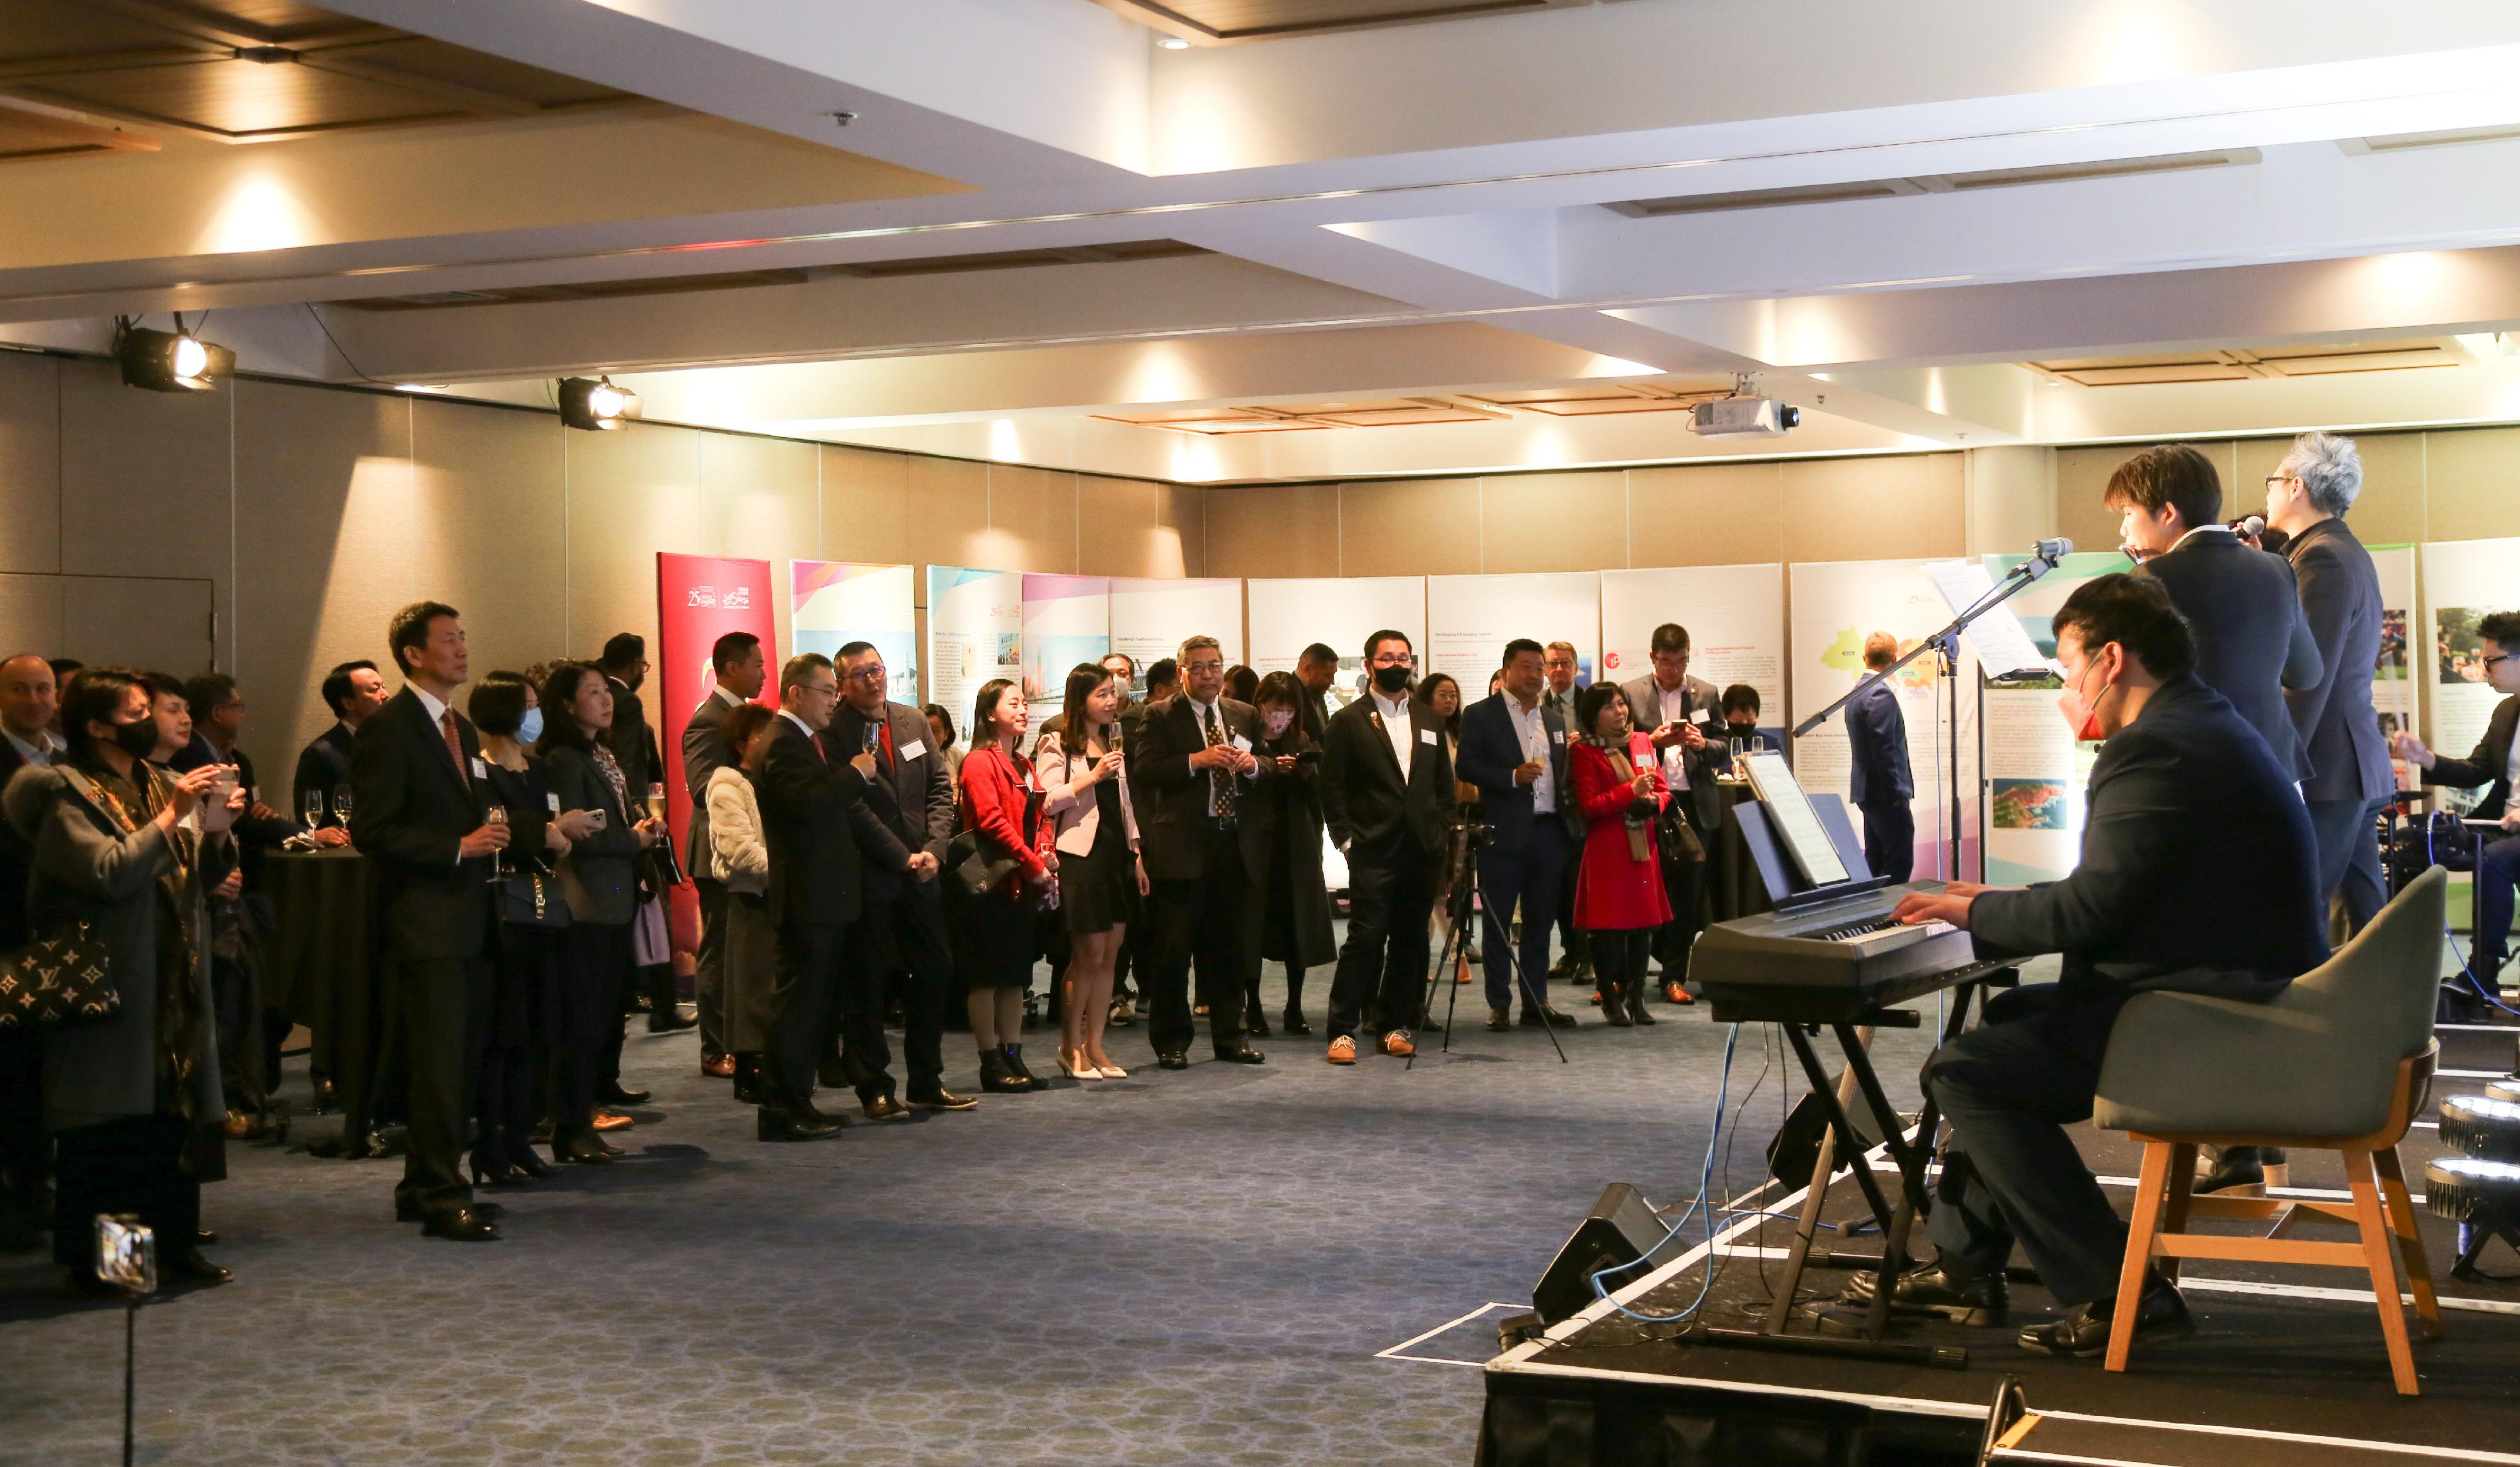 The Hong Kong Economic and Trade Office, Sydney hosted a reception in Auckland, New Zealand, today (August 2) to mark the 25th anniversary of the establishment of the Hong Kong Special Administrative Region. Over 130 guests from various sectors including political and business circles, media, academic and community groups as well as government representatives attended the reception.